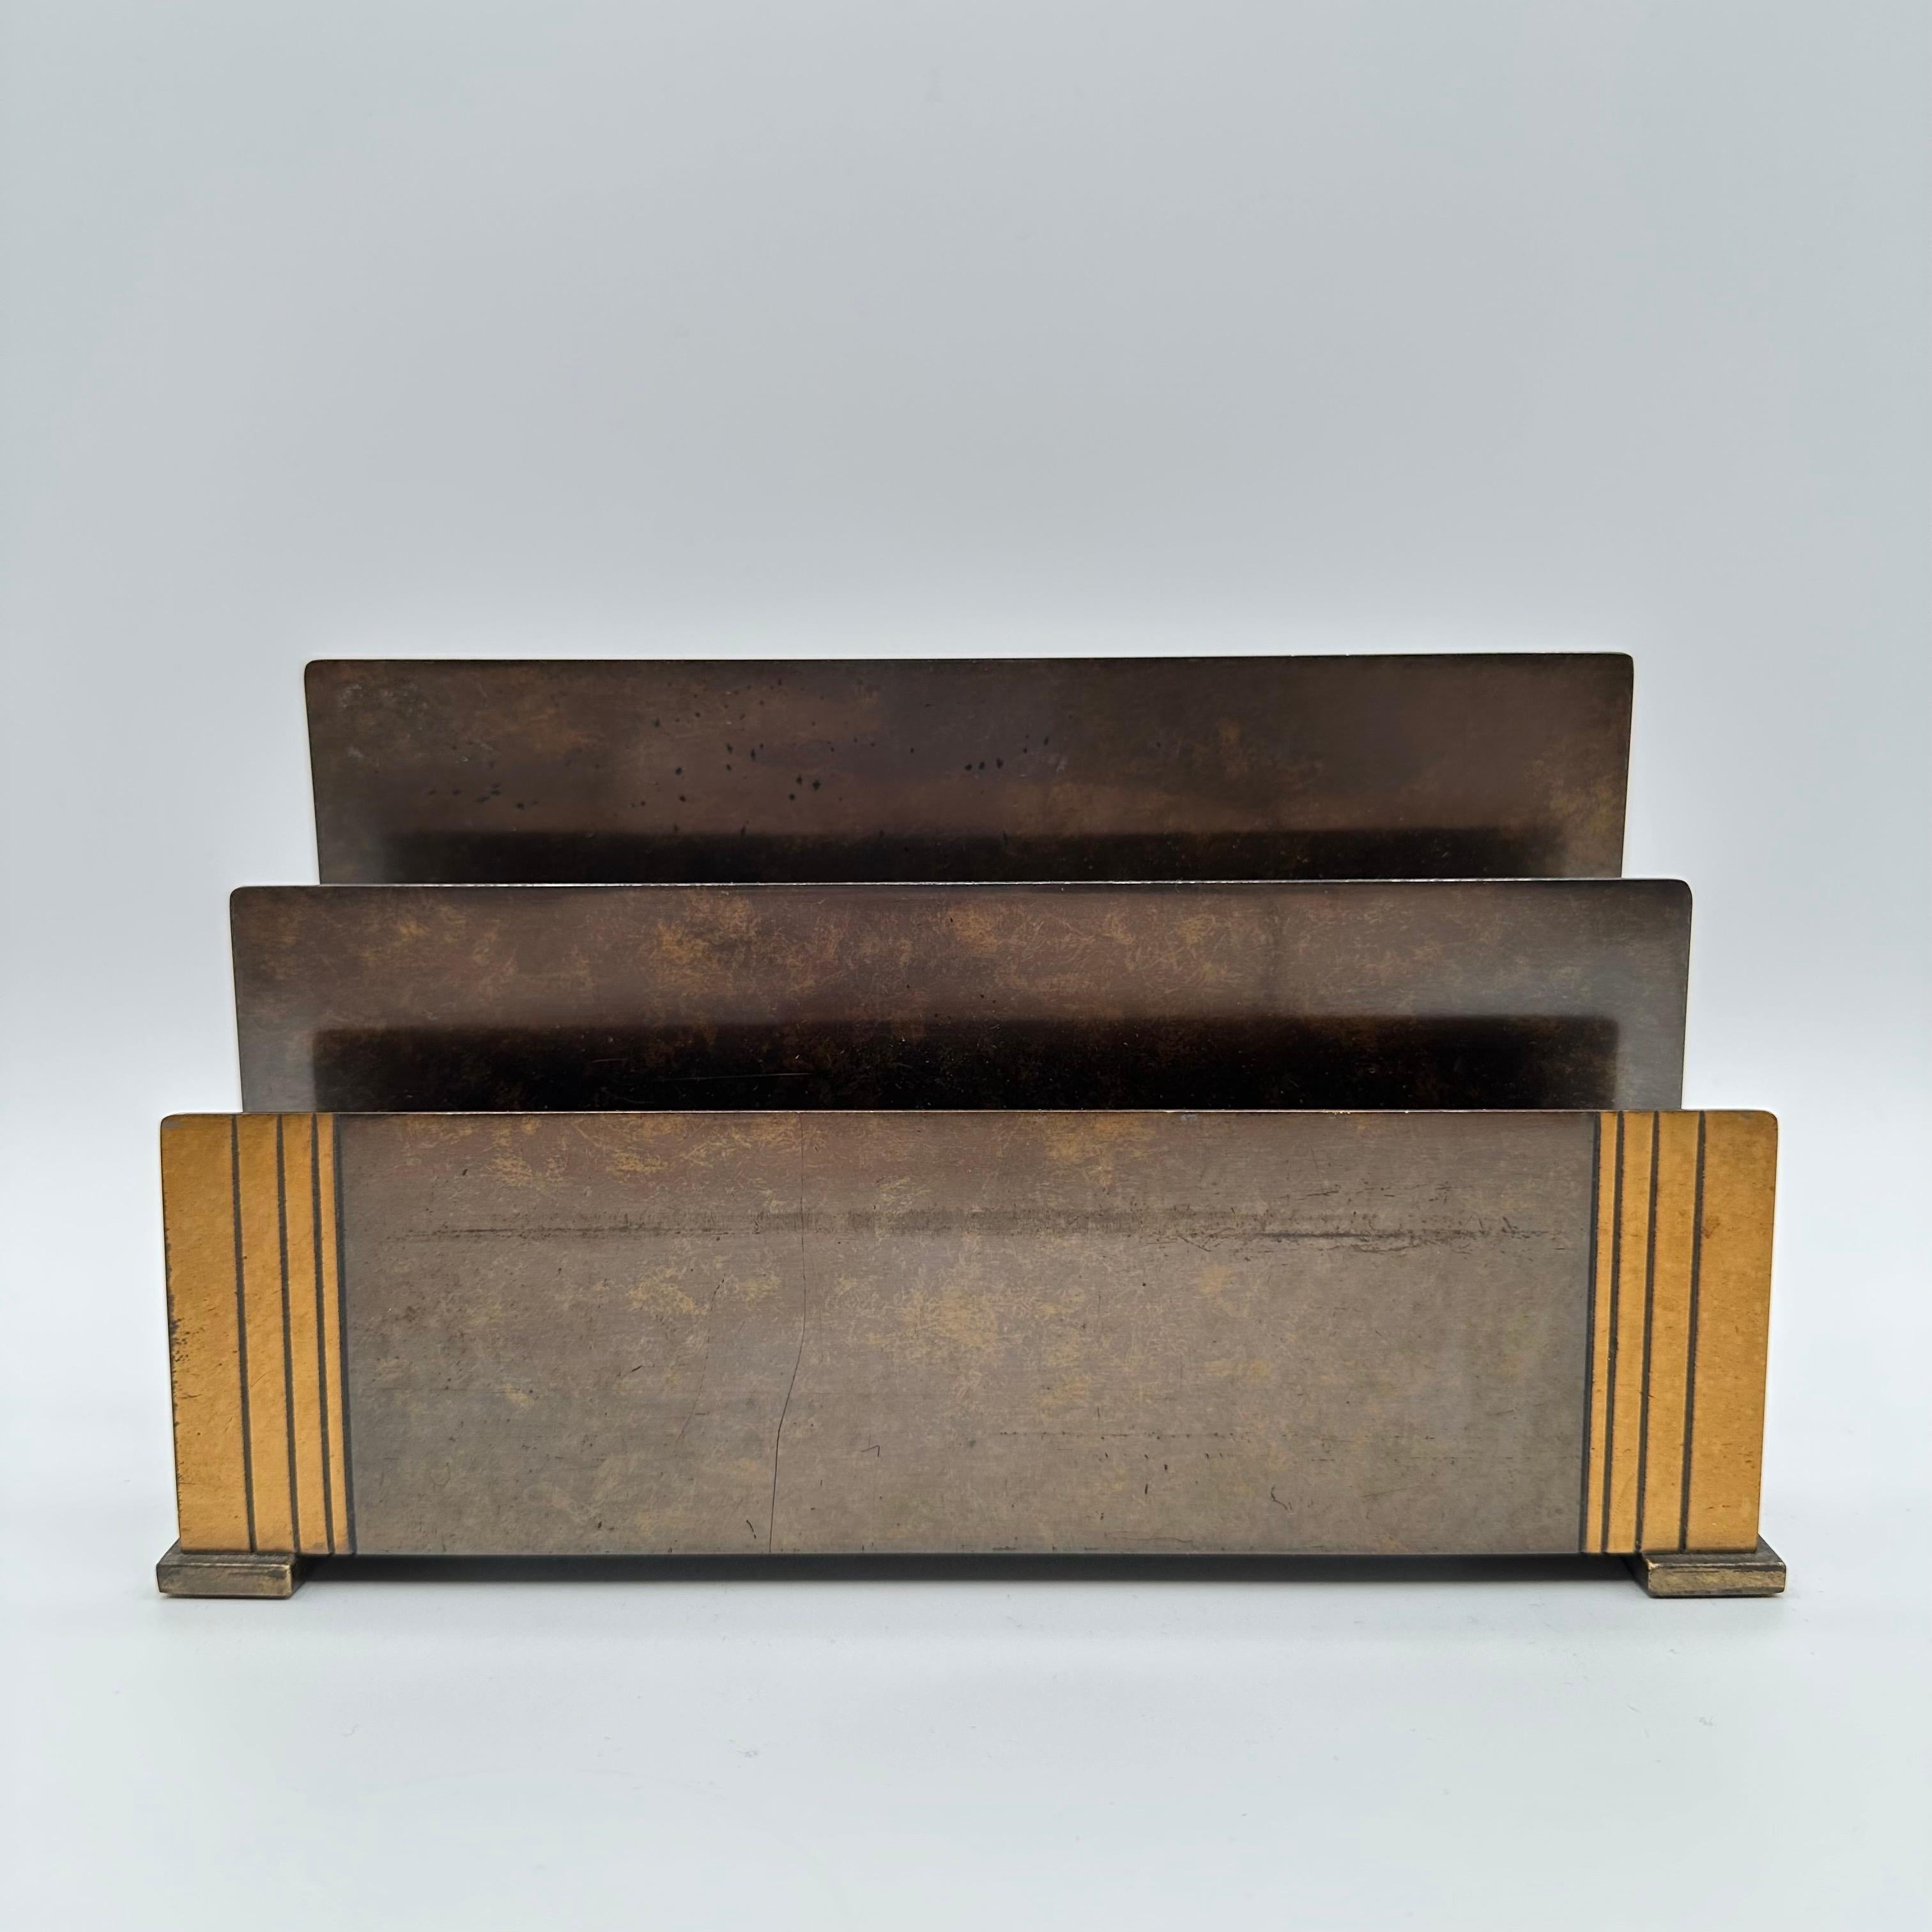 Vintage art deco letter holder by Silver Crest in a beautiful patinated bronze of varying tones. Featuring a linear, fluted, column like contrasting motif on each side, along with large rectangular sled - like feet. Stamped 